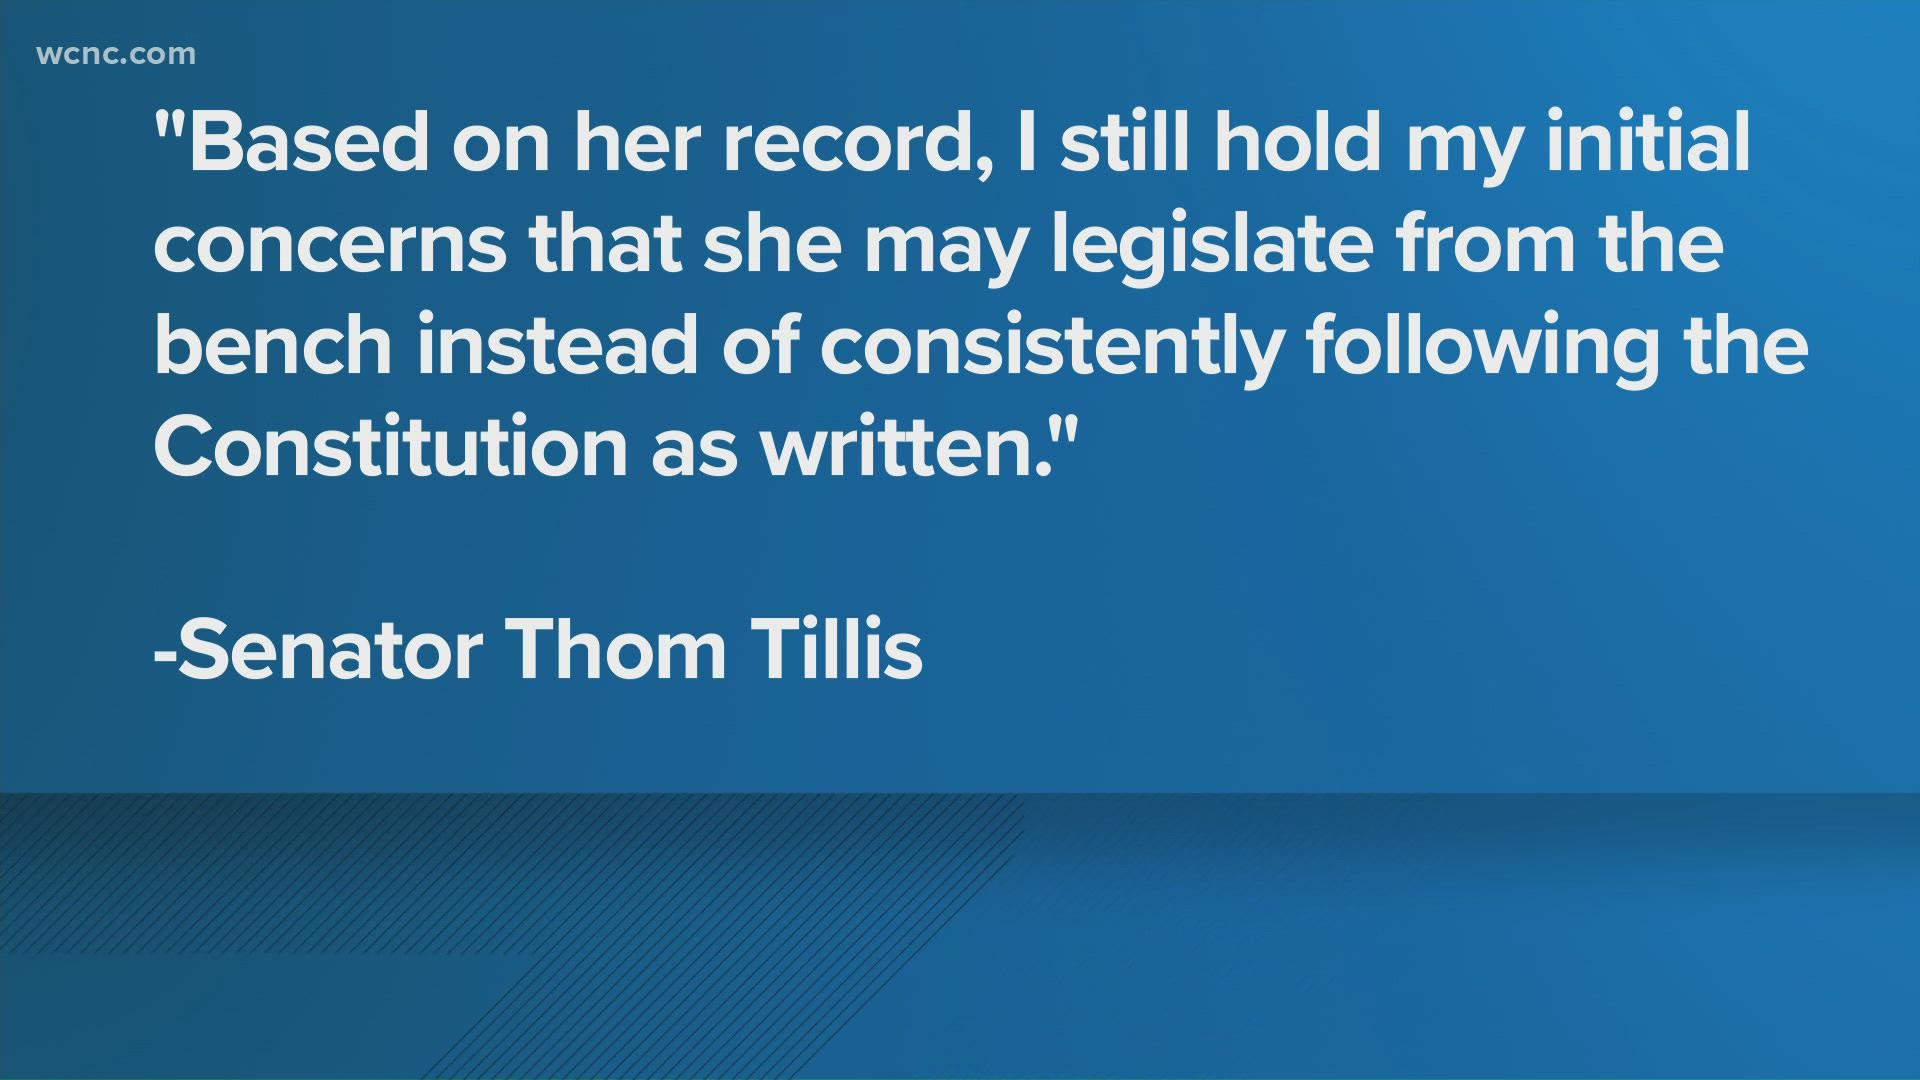 Tillis said she's qualified, but claimed he feared Jackson would "legislate from the bench".